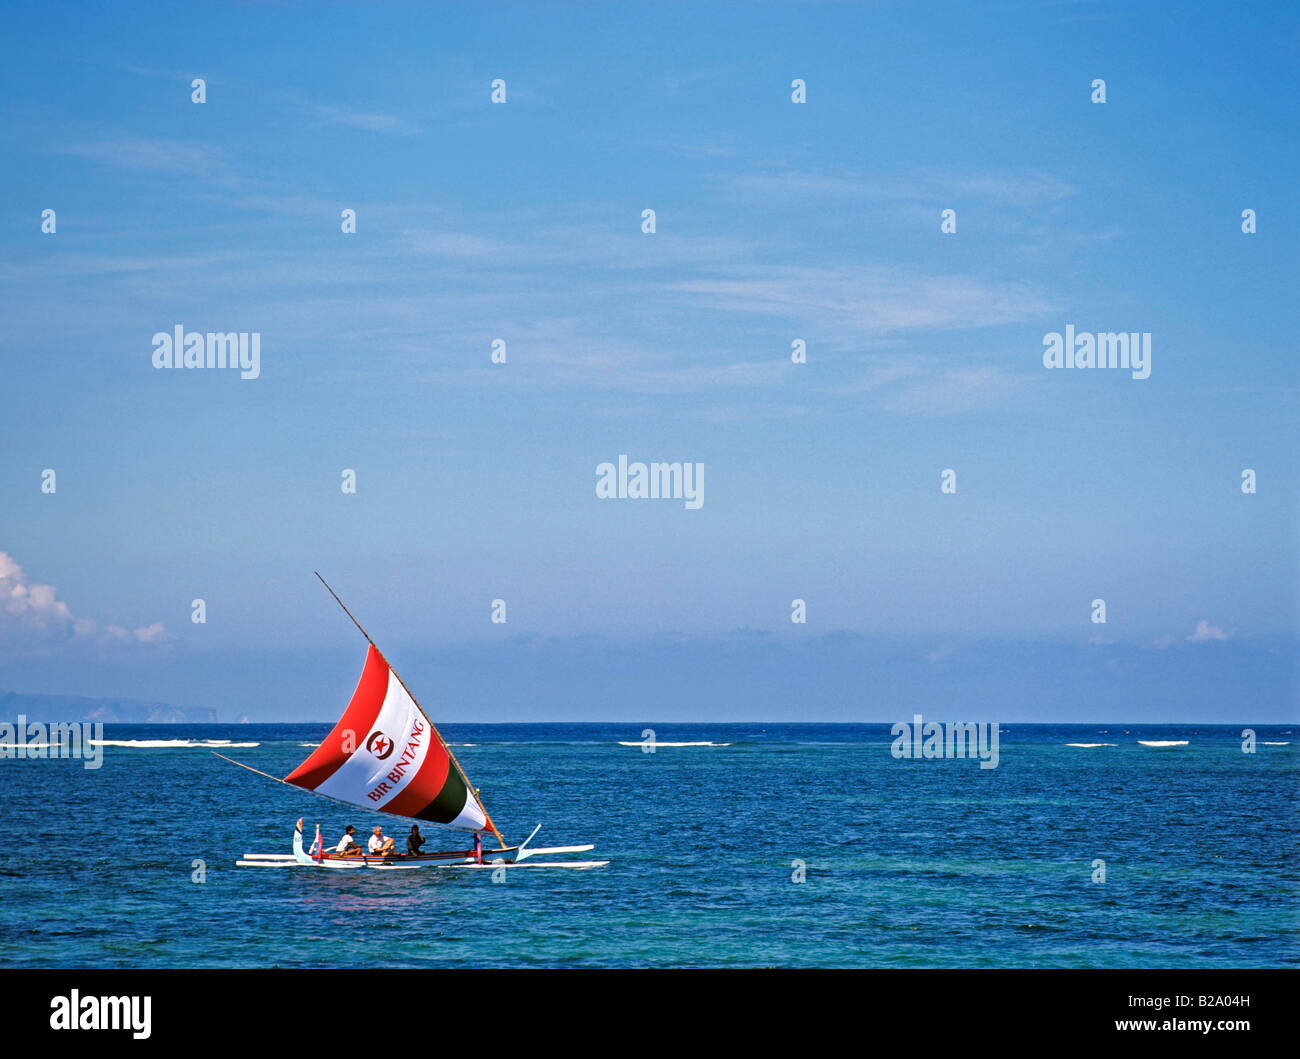 Outrigger boat Bali Indonesia Date 28 03 2008 Ref WP B548 111653 0051 COMPULSORY CREDIT World Pictures Photoshot Stock Photo